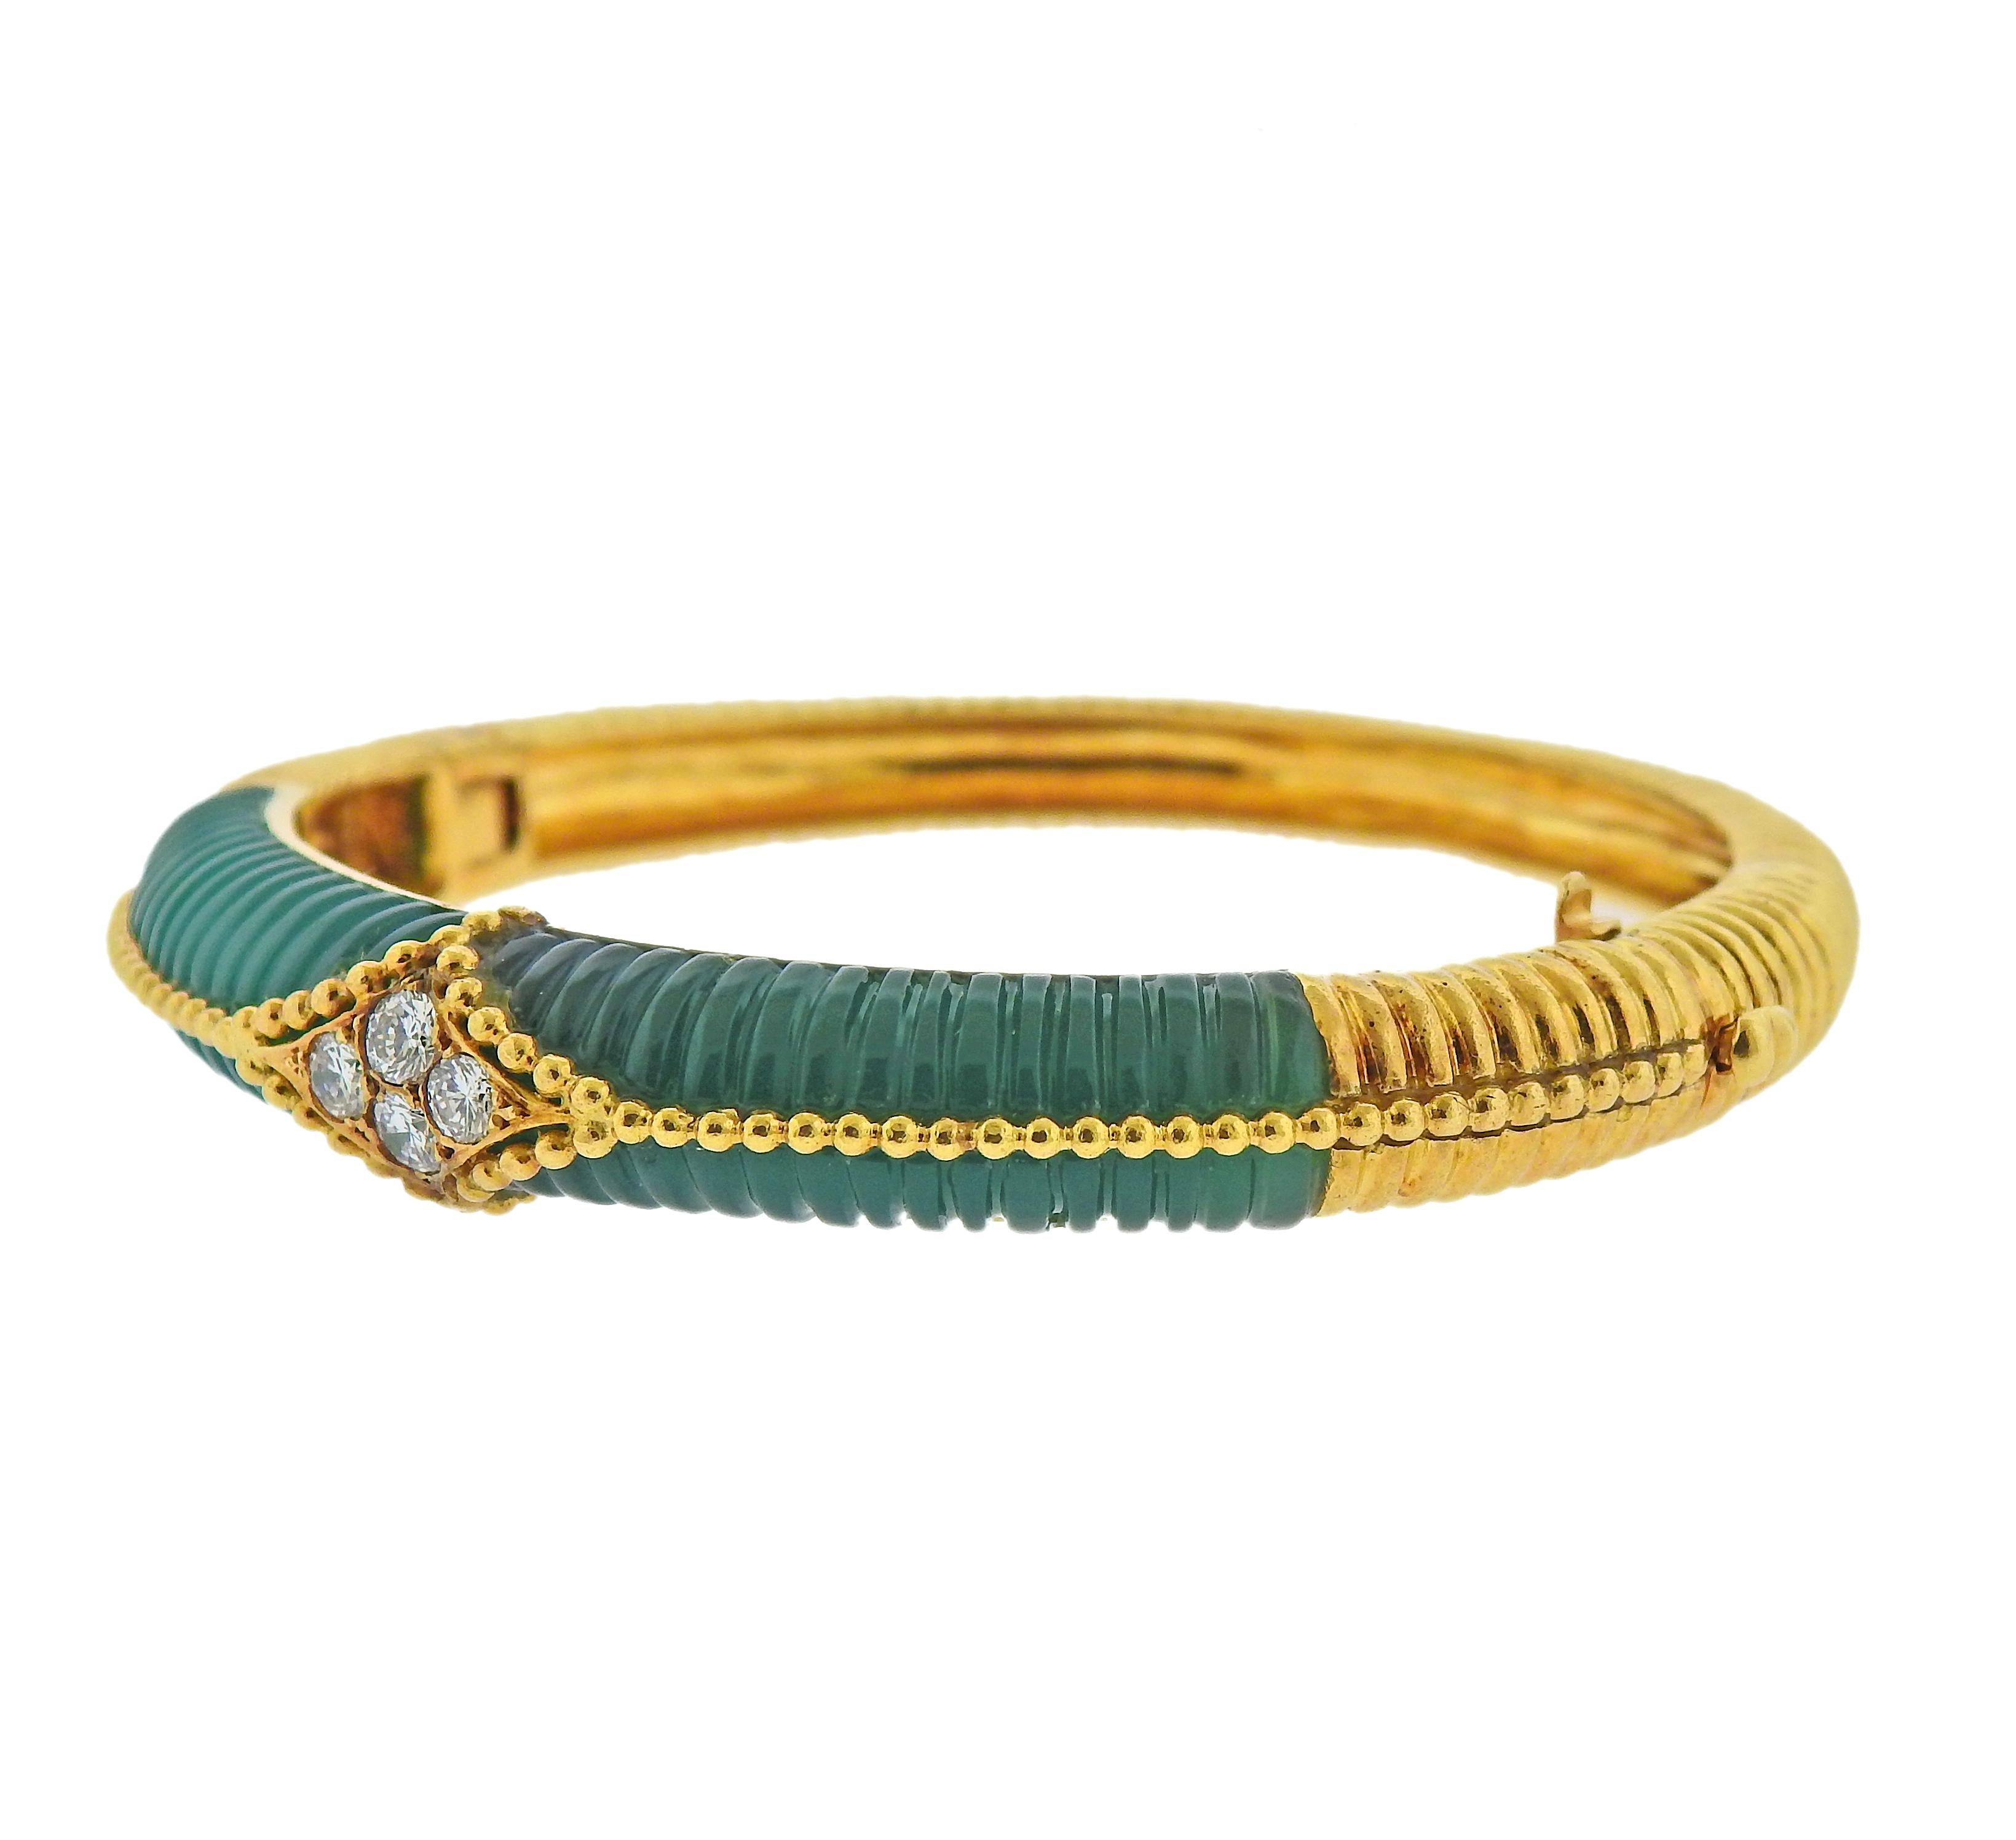 18k gold vintage Van Cleef & Arpels bangle bracelet with carved chrysoprase and approx. 0.40ctw in diamonds. Bracelet will fit approx. 7